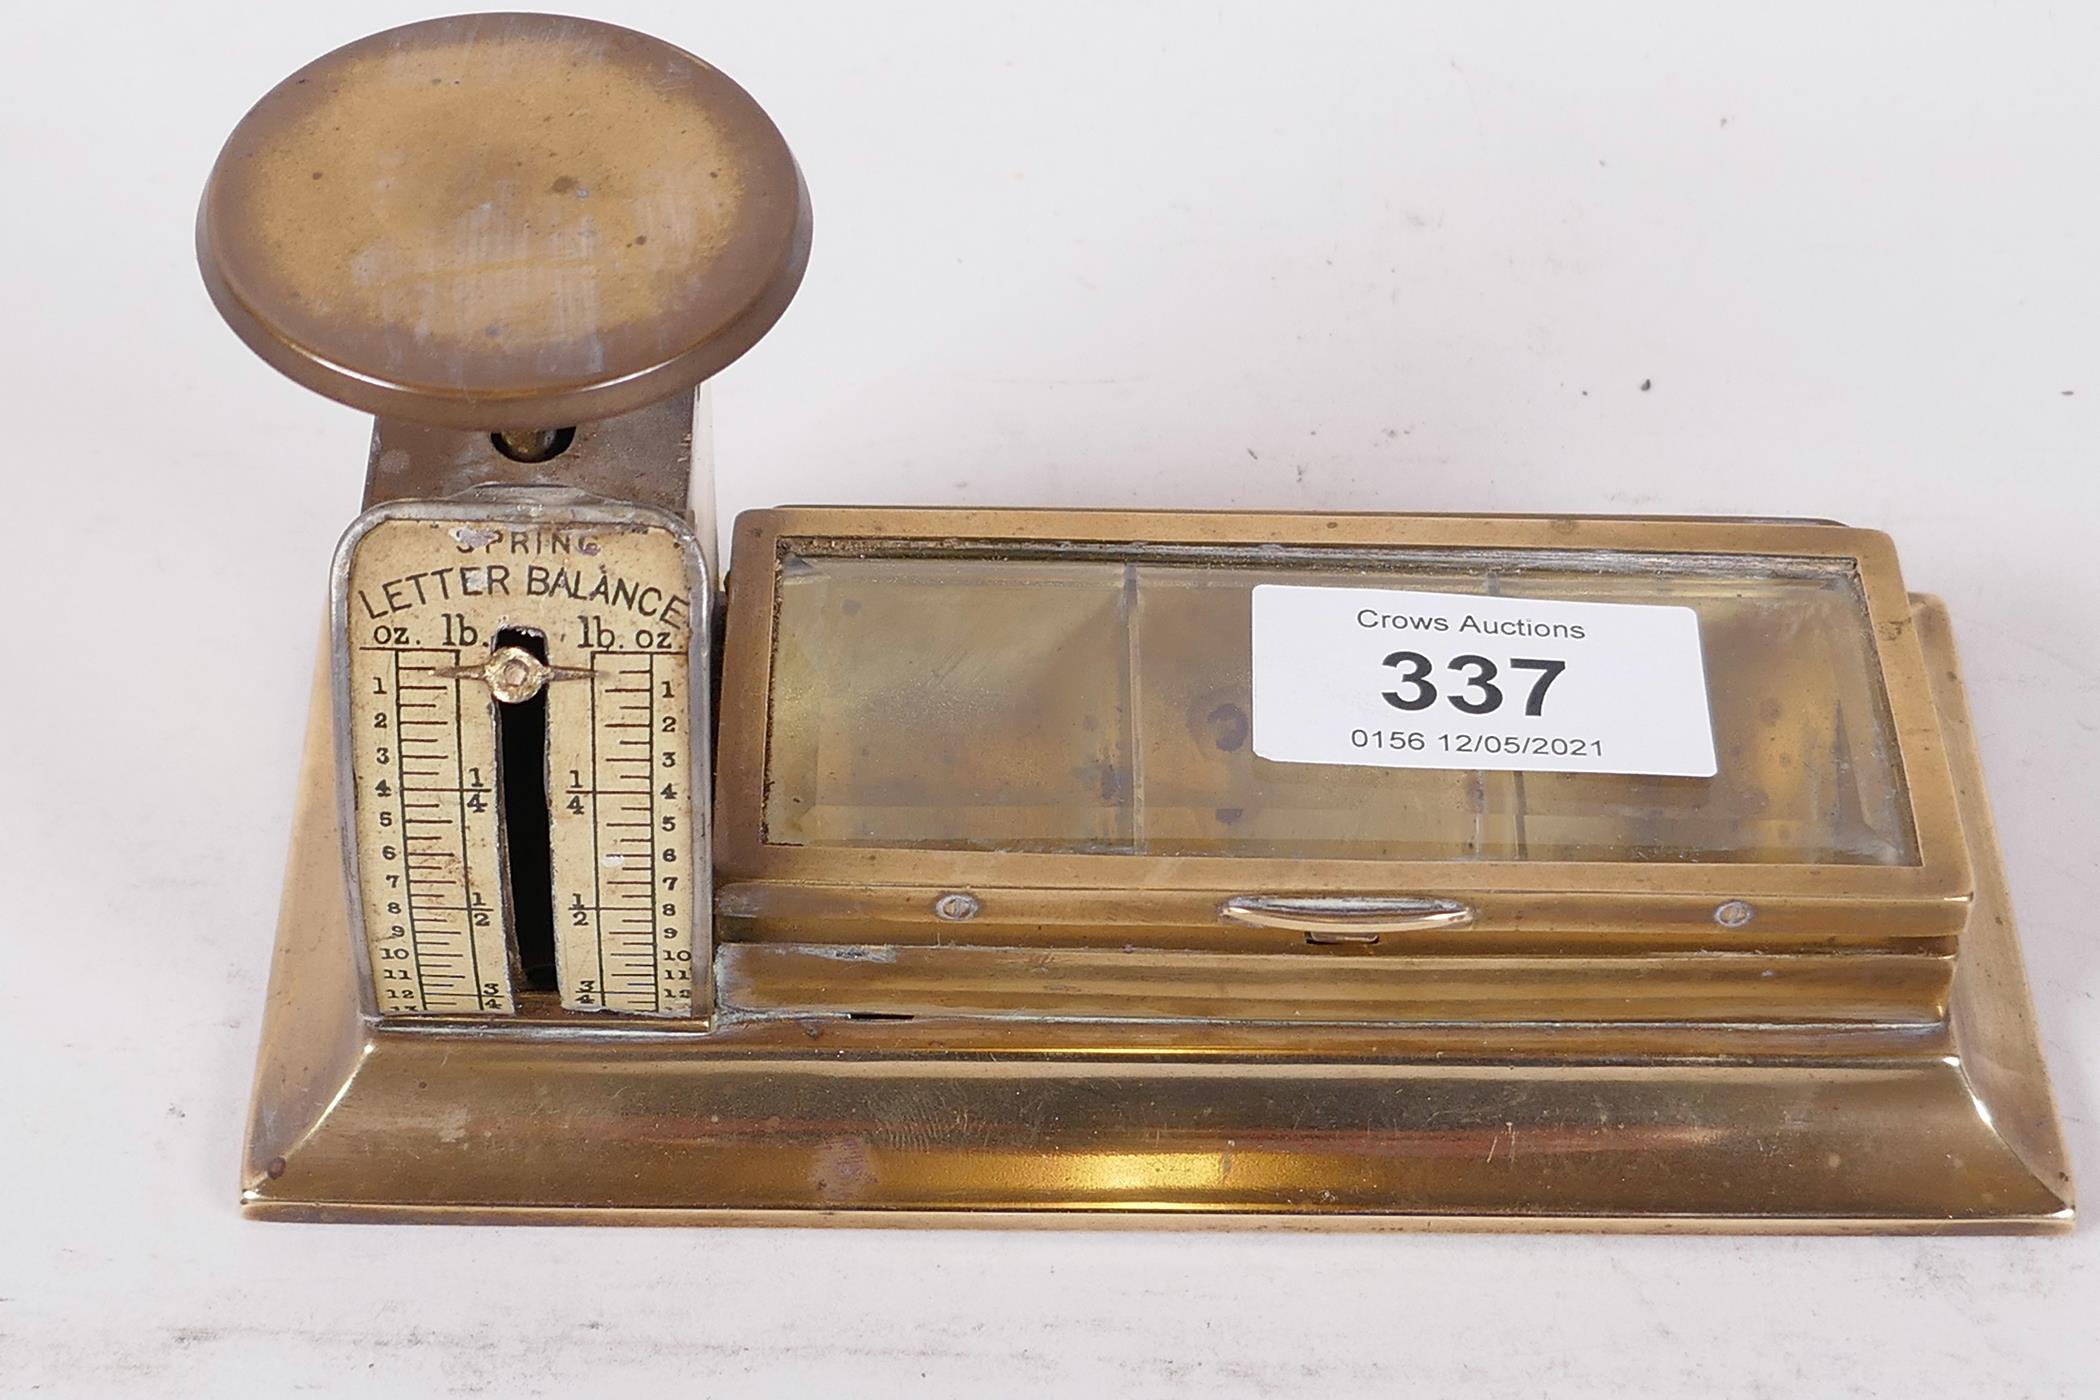 An antique brass spring letter balance, measuring to 12 oz, complete with stamp tray under - Image 2 of 2